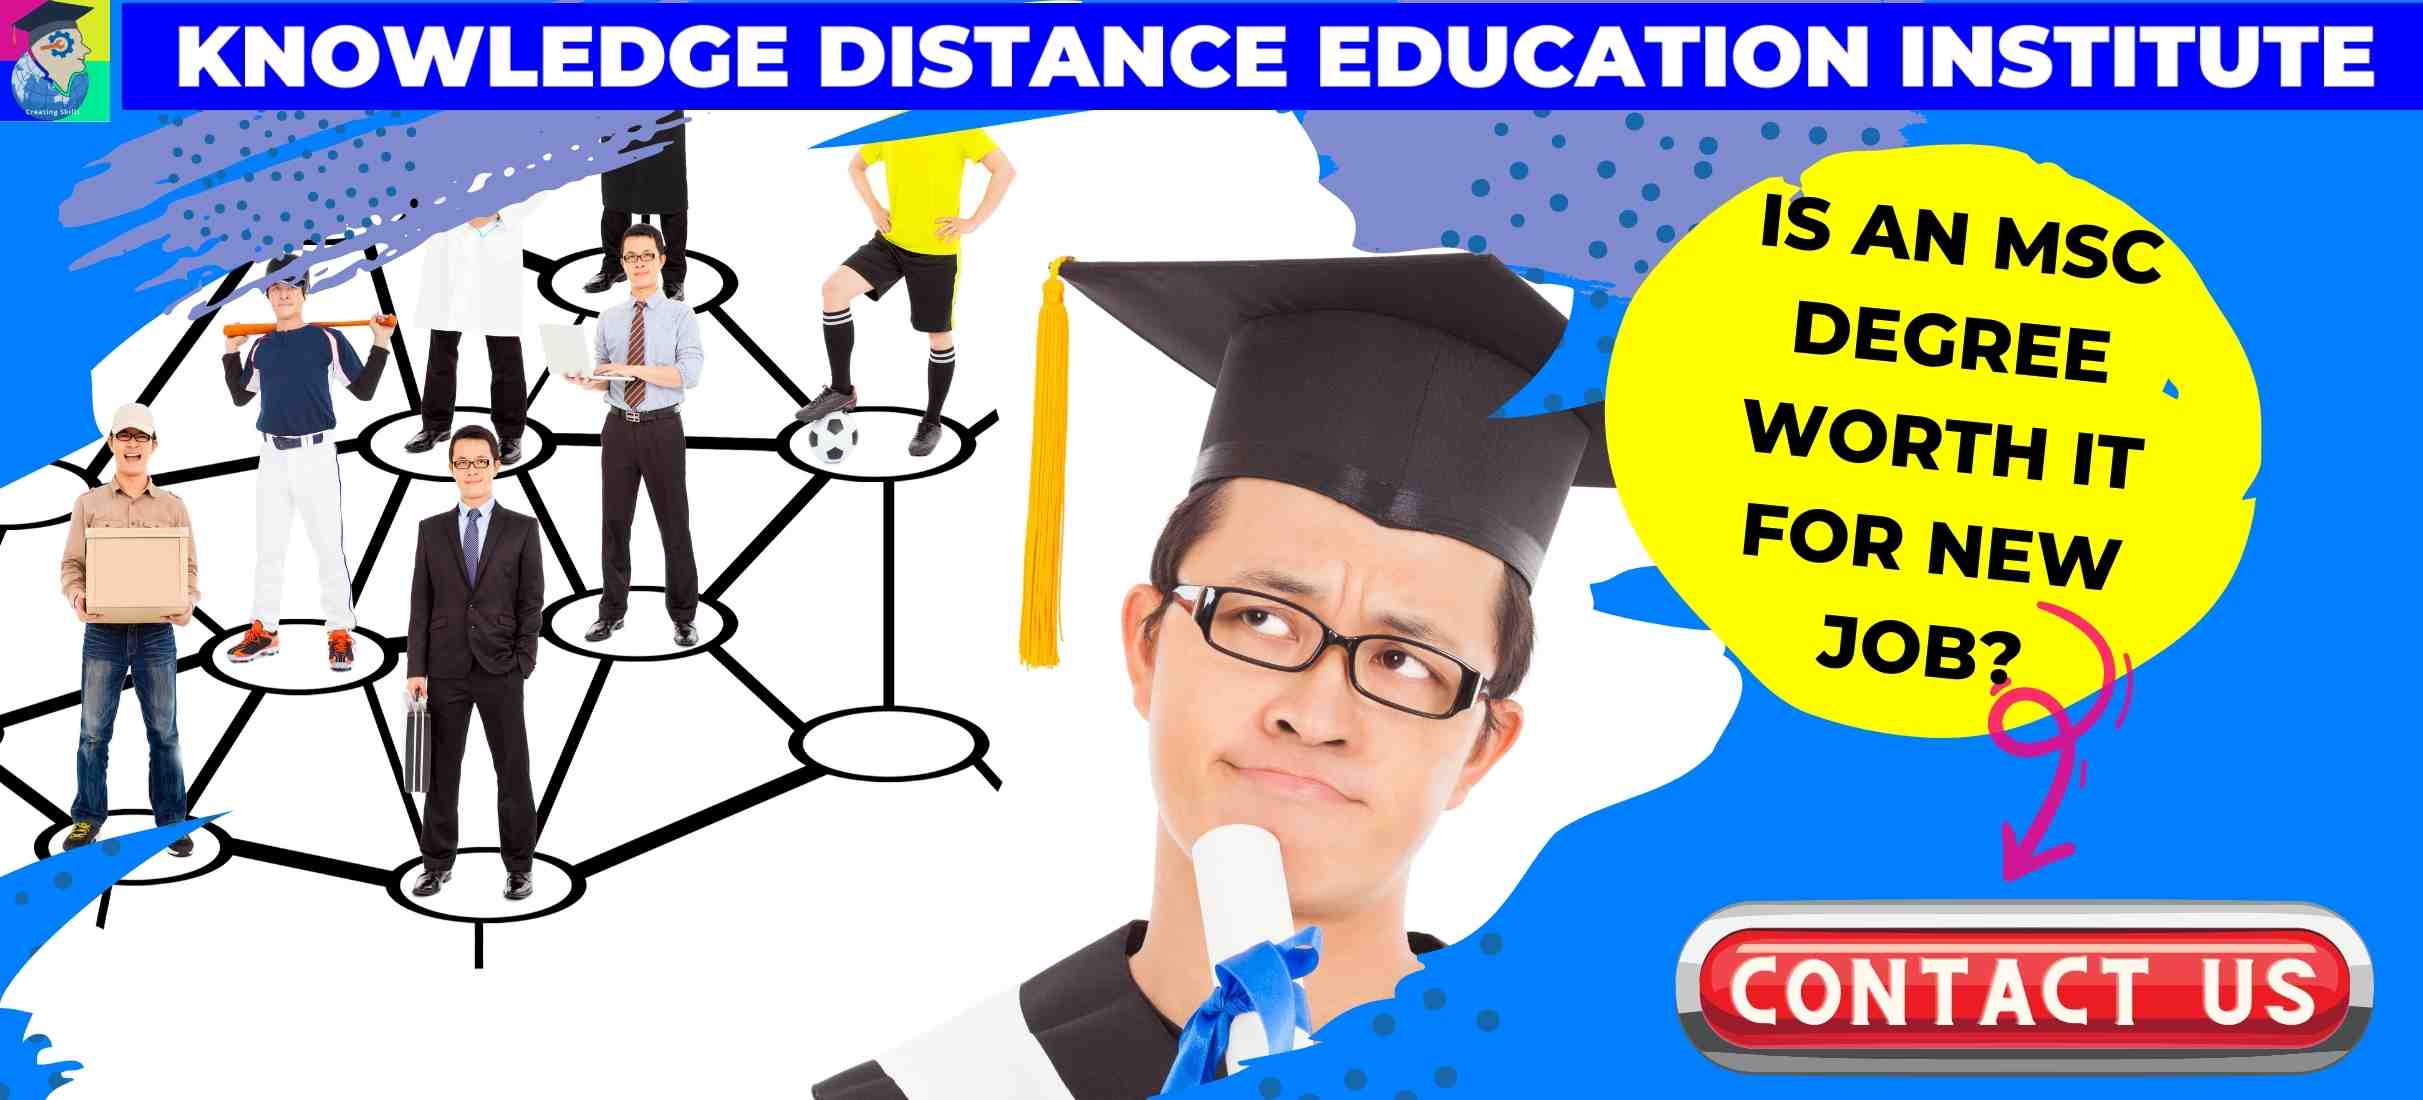 Master Of Science - M.Sc is 2 years degree course, offered in Part-time or  Regular Learning modes by UGC recognized Universities in India. For career guidance you may contact Knowedge Distance Education Institute on +91 9029020524